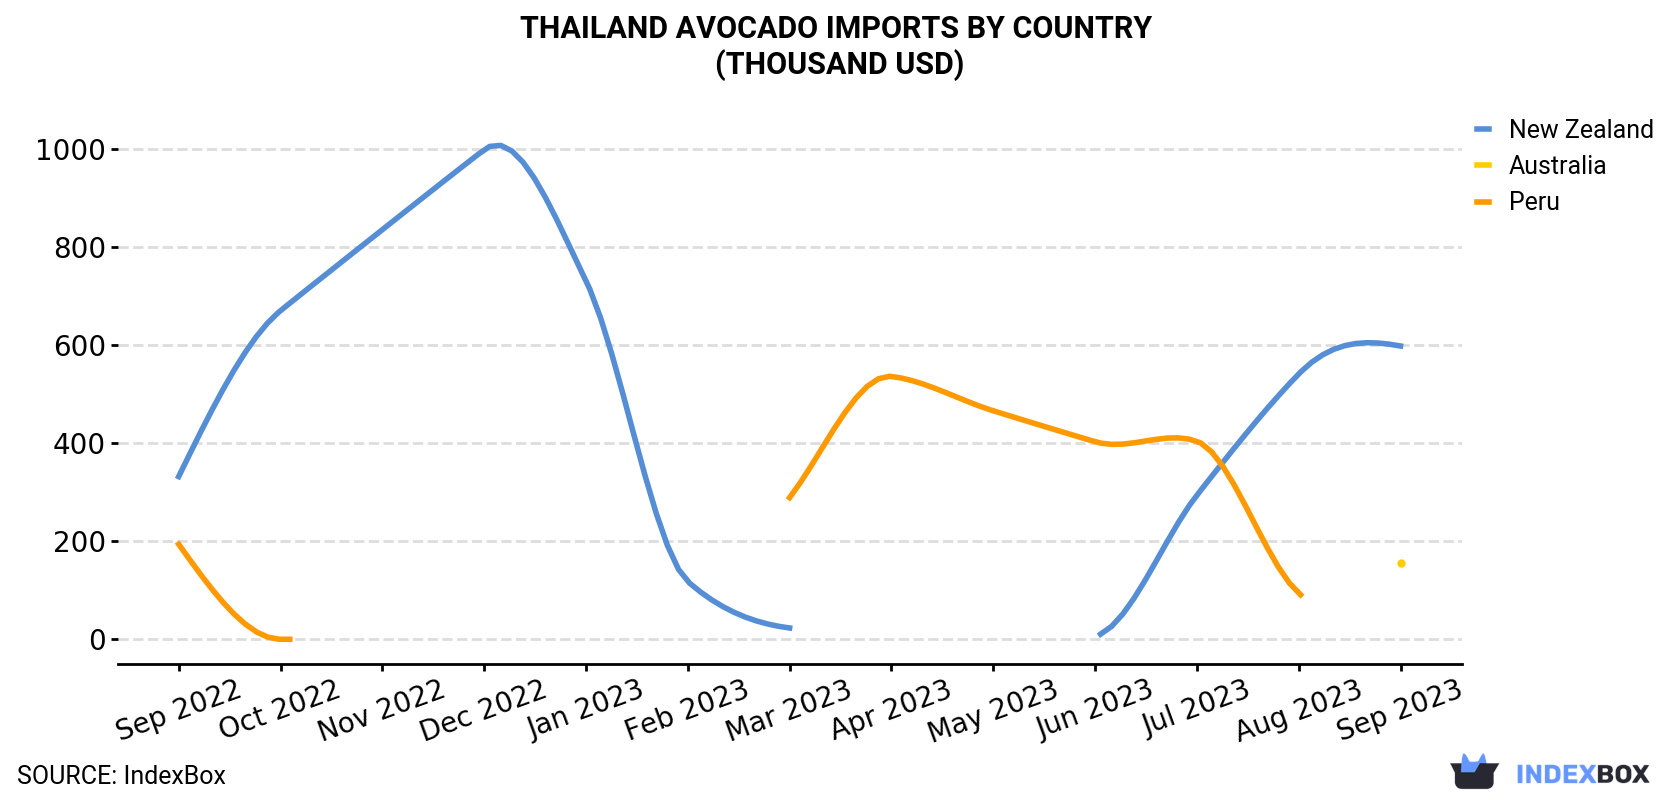 Thailand Avocado Imports By Country (Thousand USD)